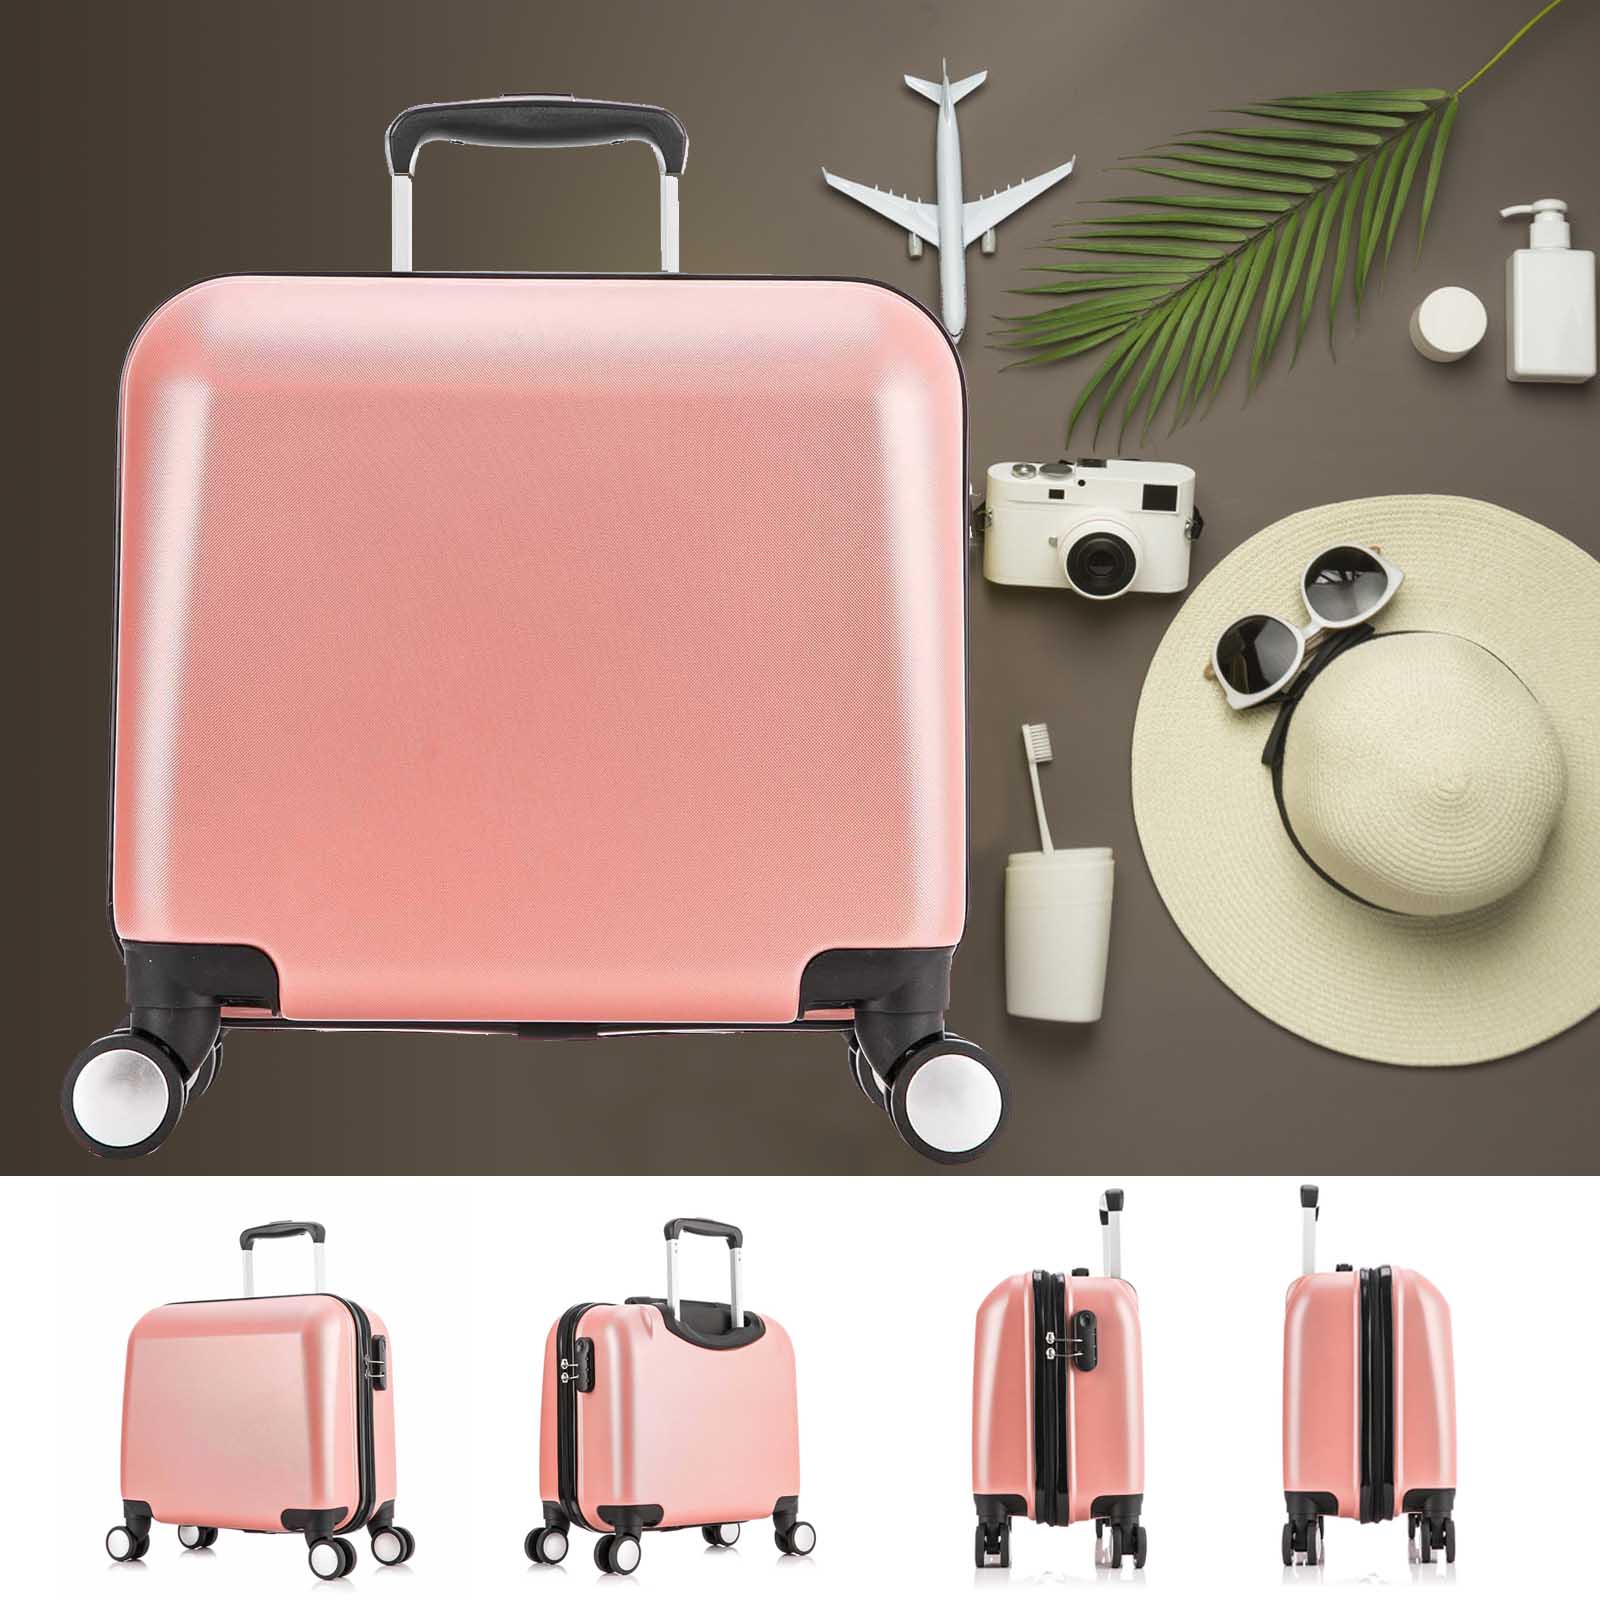 18'' Underseat Luggage with Multi-directional Spinner Wheels ...